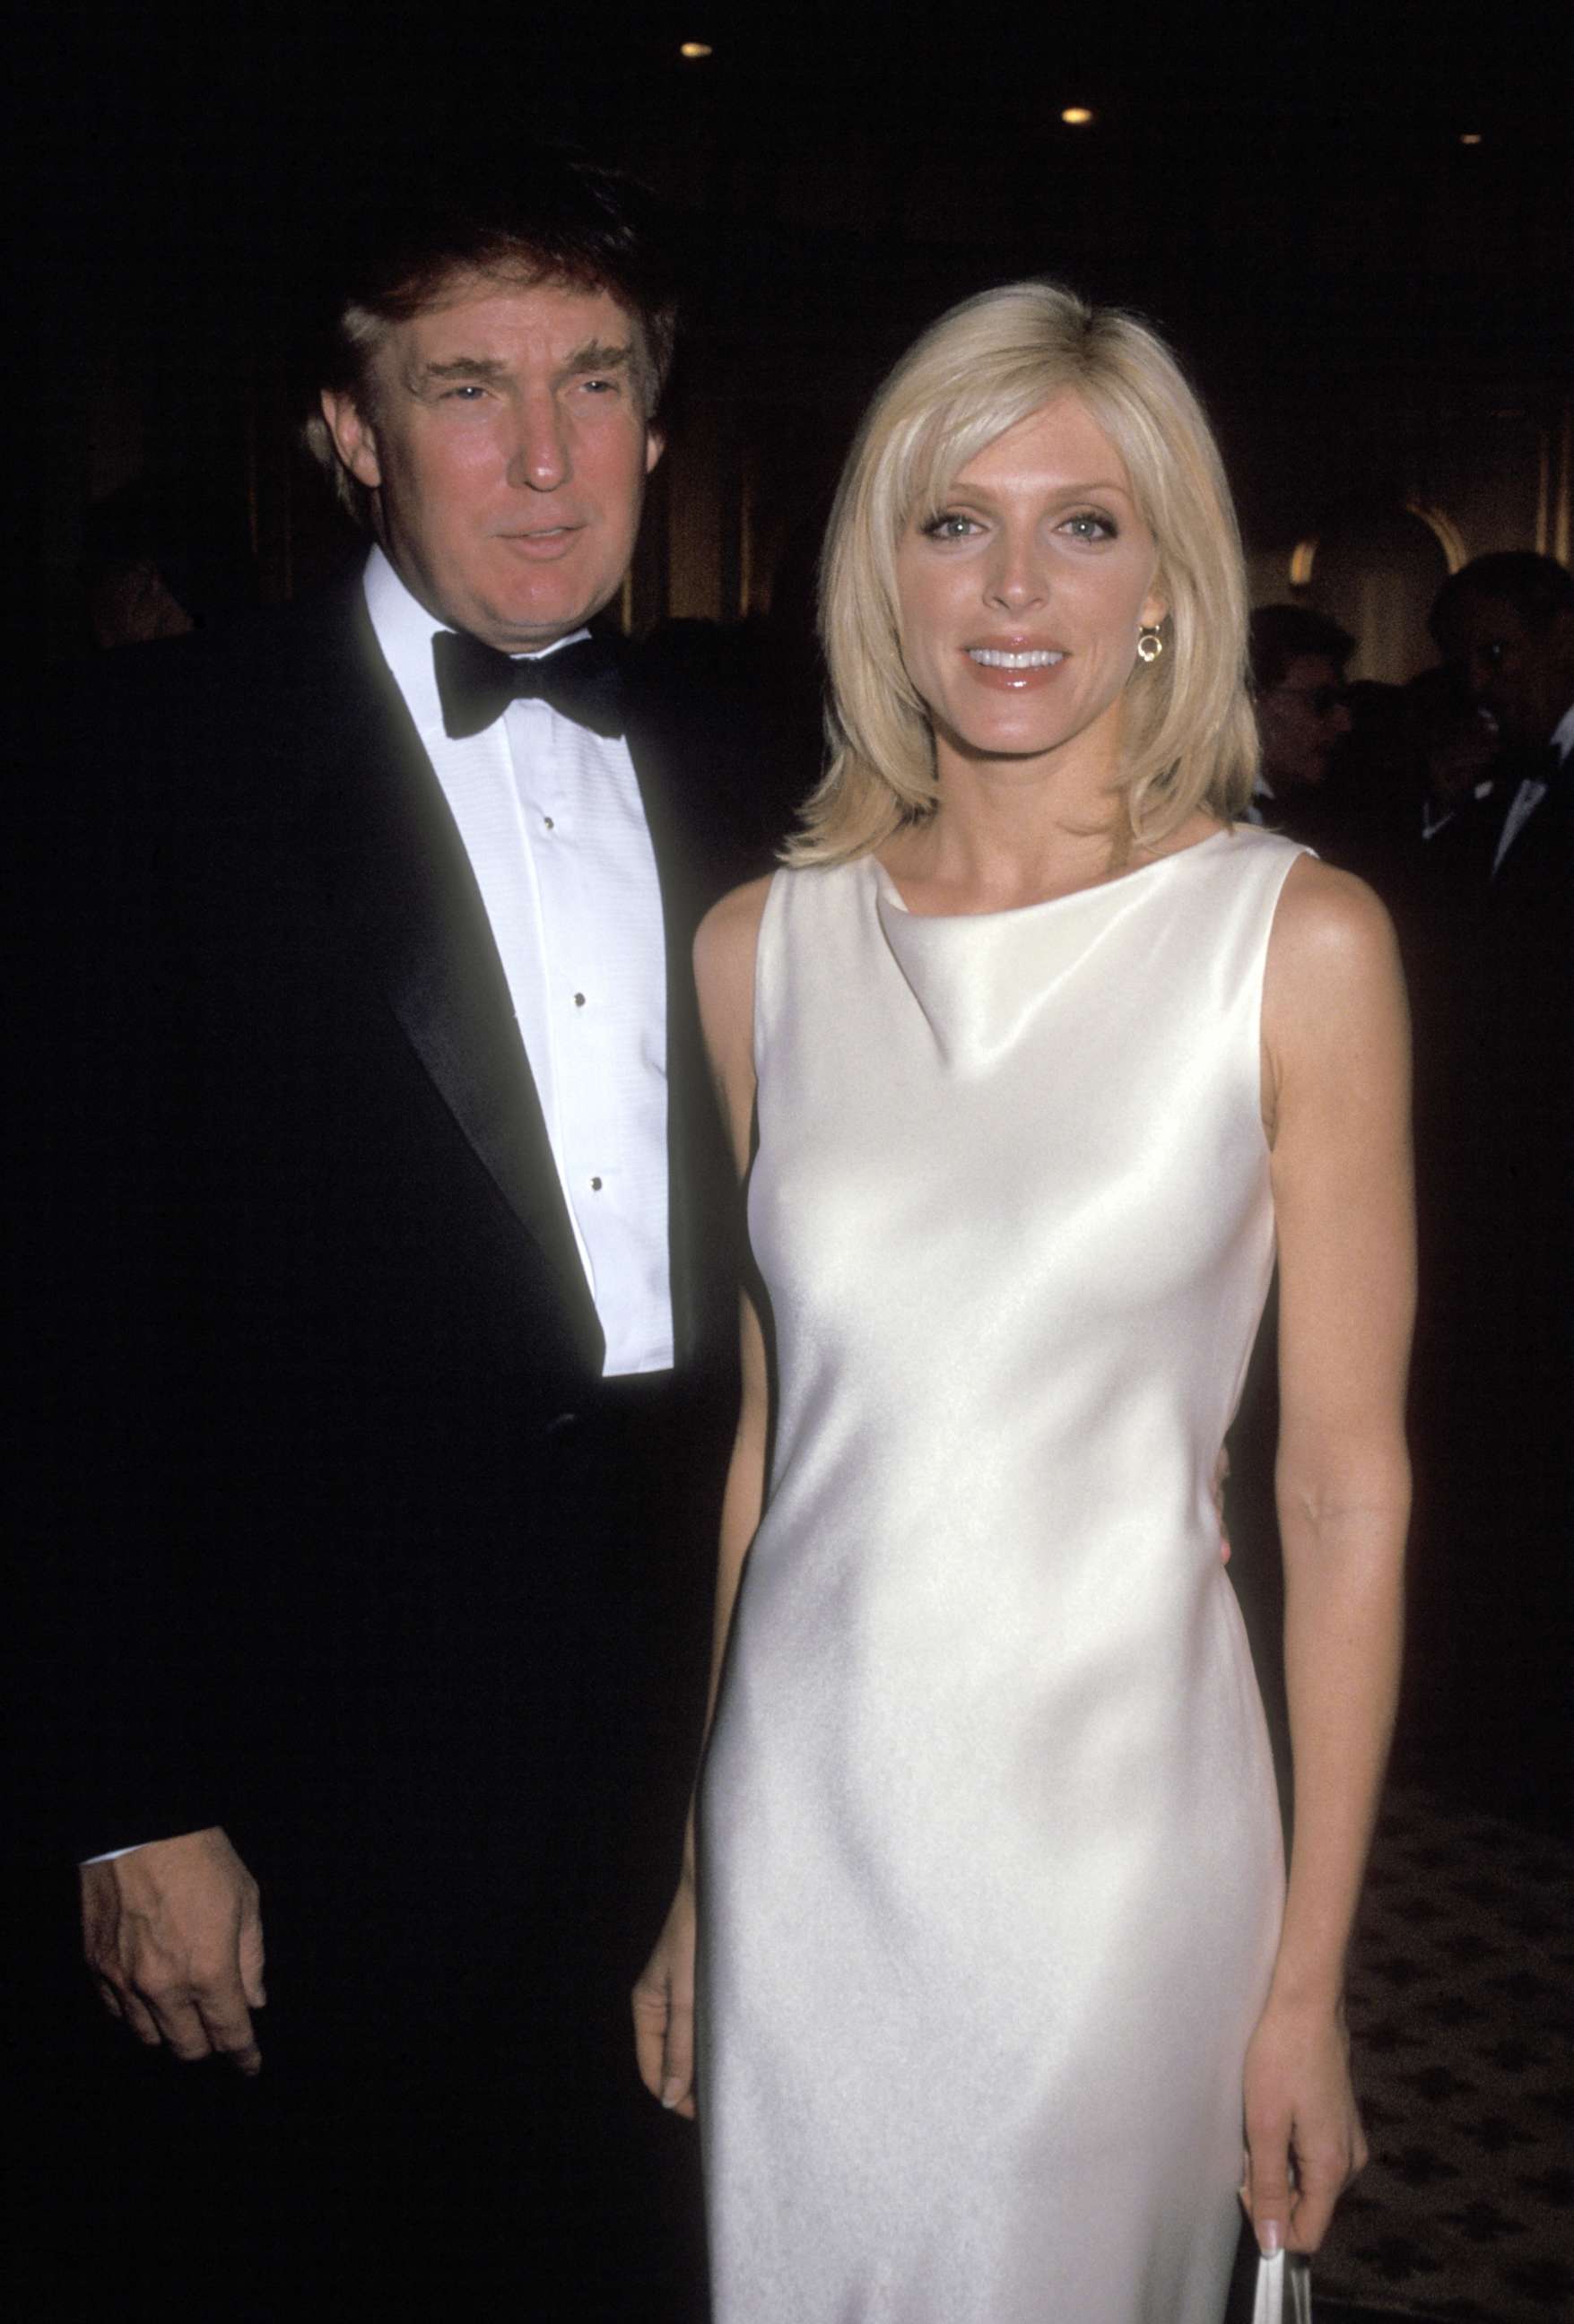 PHOTO: Donald Trump and Marla Maples attend Le Cirque Grand Opening in  this  April 30, 1997 file photo in N.Y.